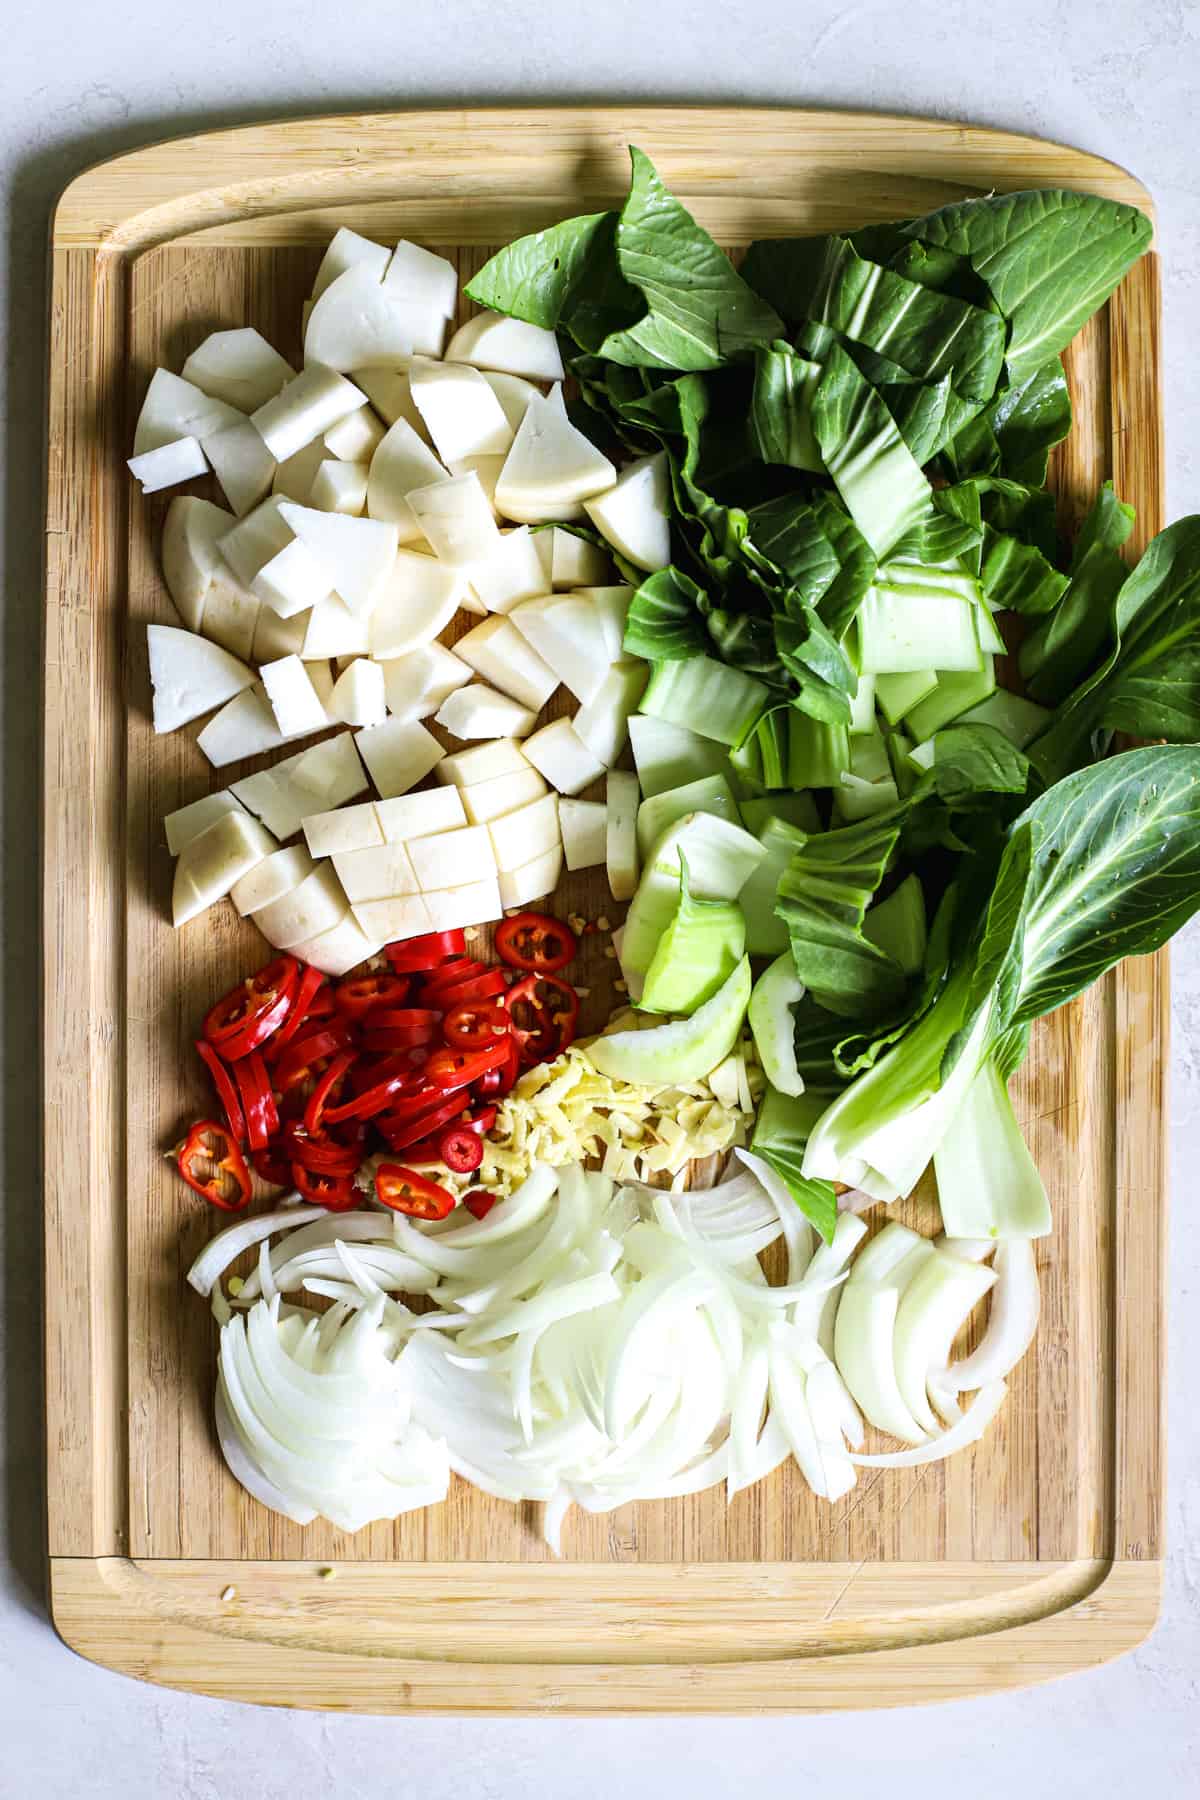 Chopped turnips, baby bok choy, red chili peppers, garlic, ginger, and sliced onions on bamboo cutting board